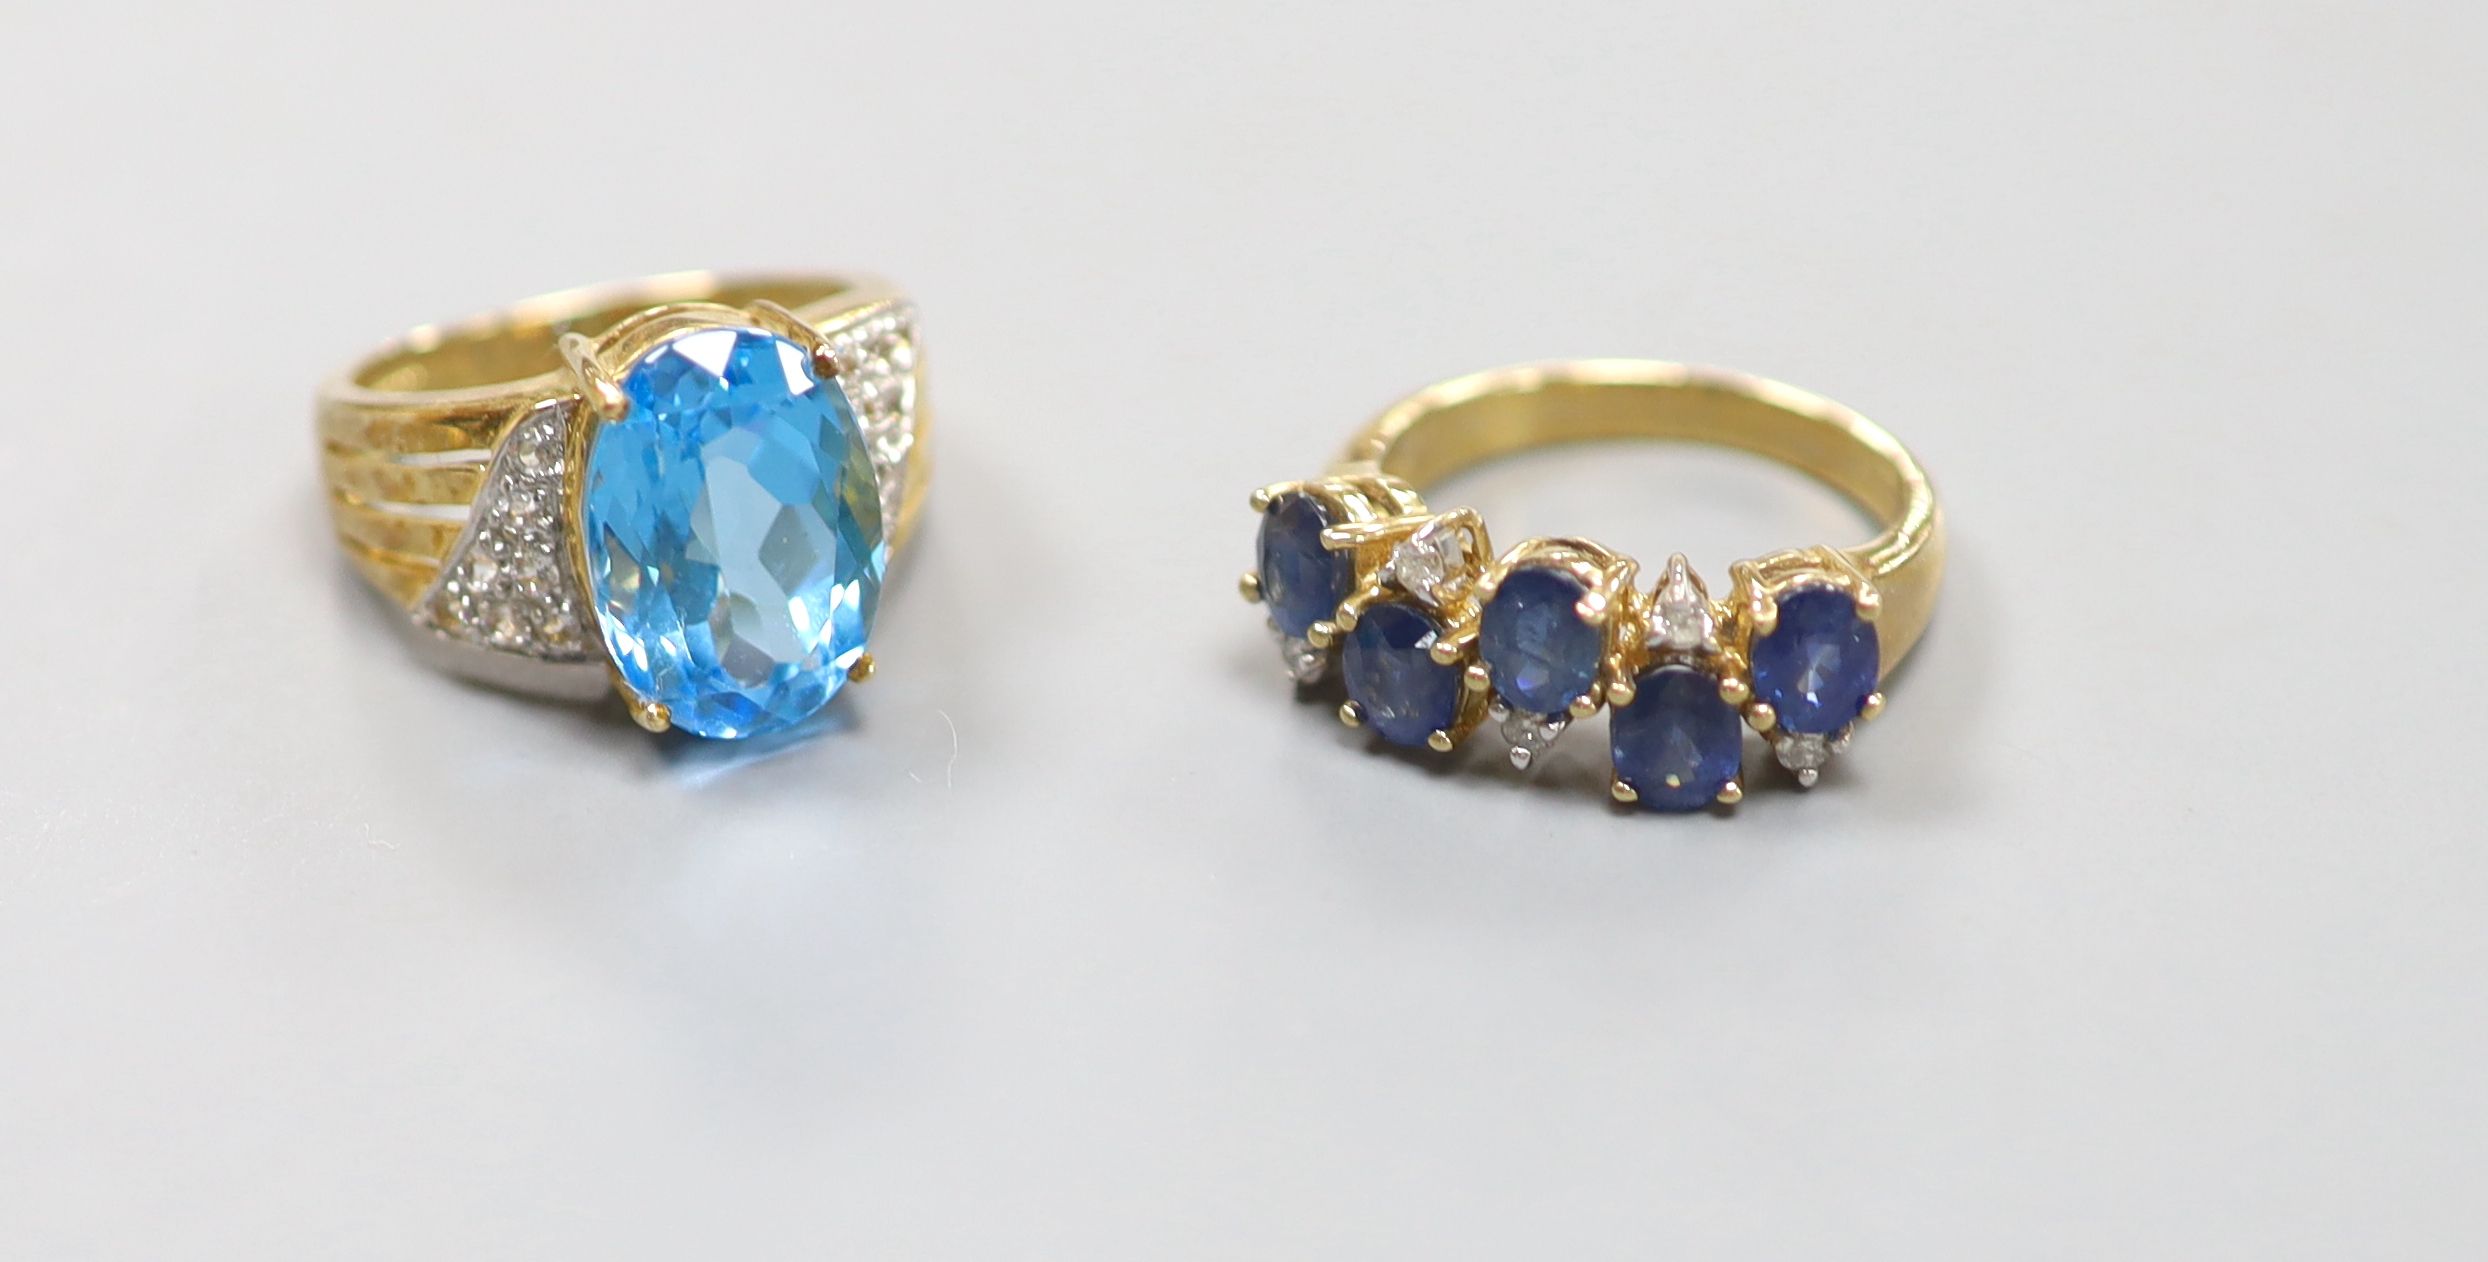 A sapphire and diamond double line ring, 9ct gold shank and another 9ct gold ring set blue and white topaz